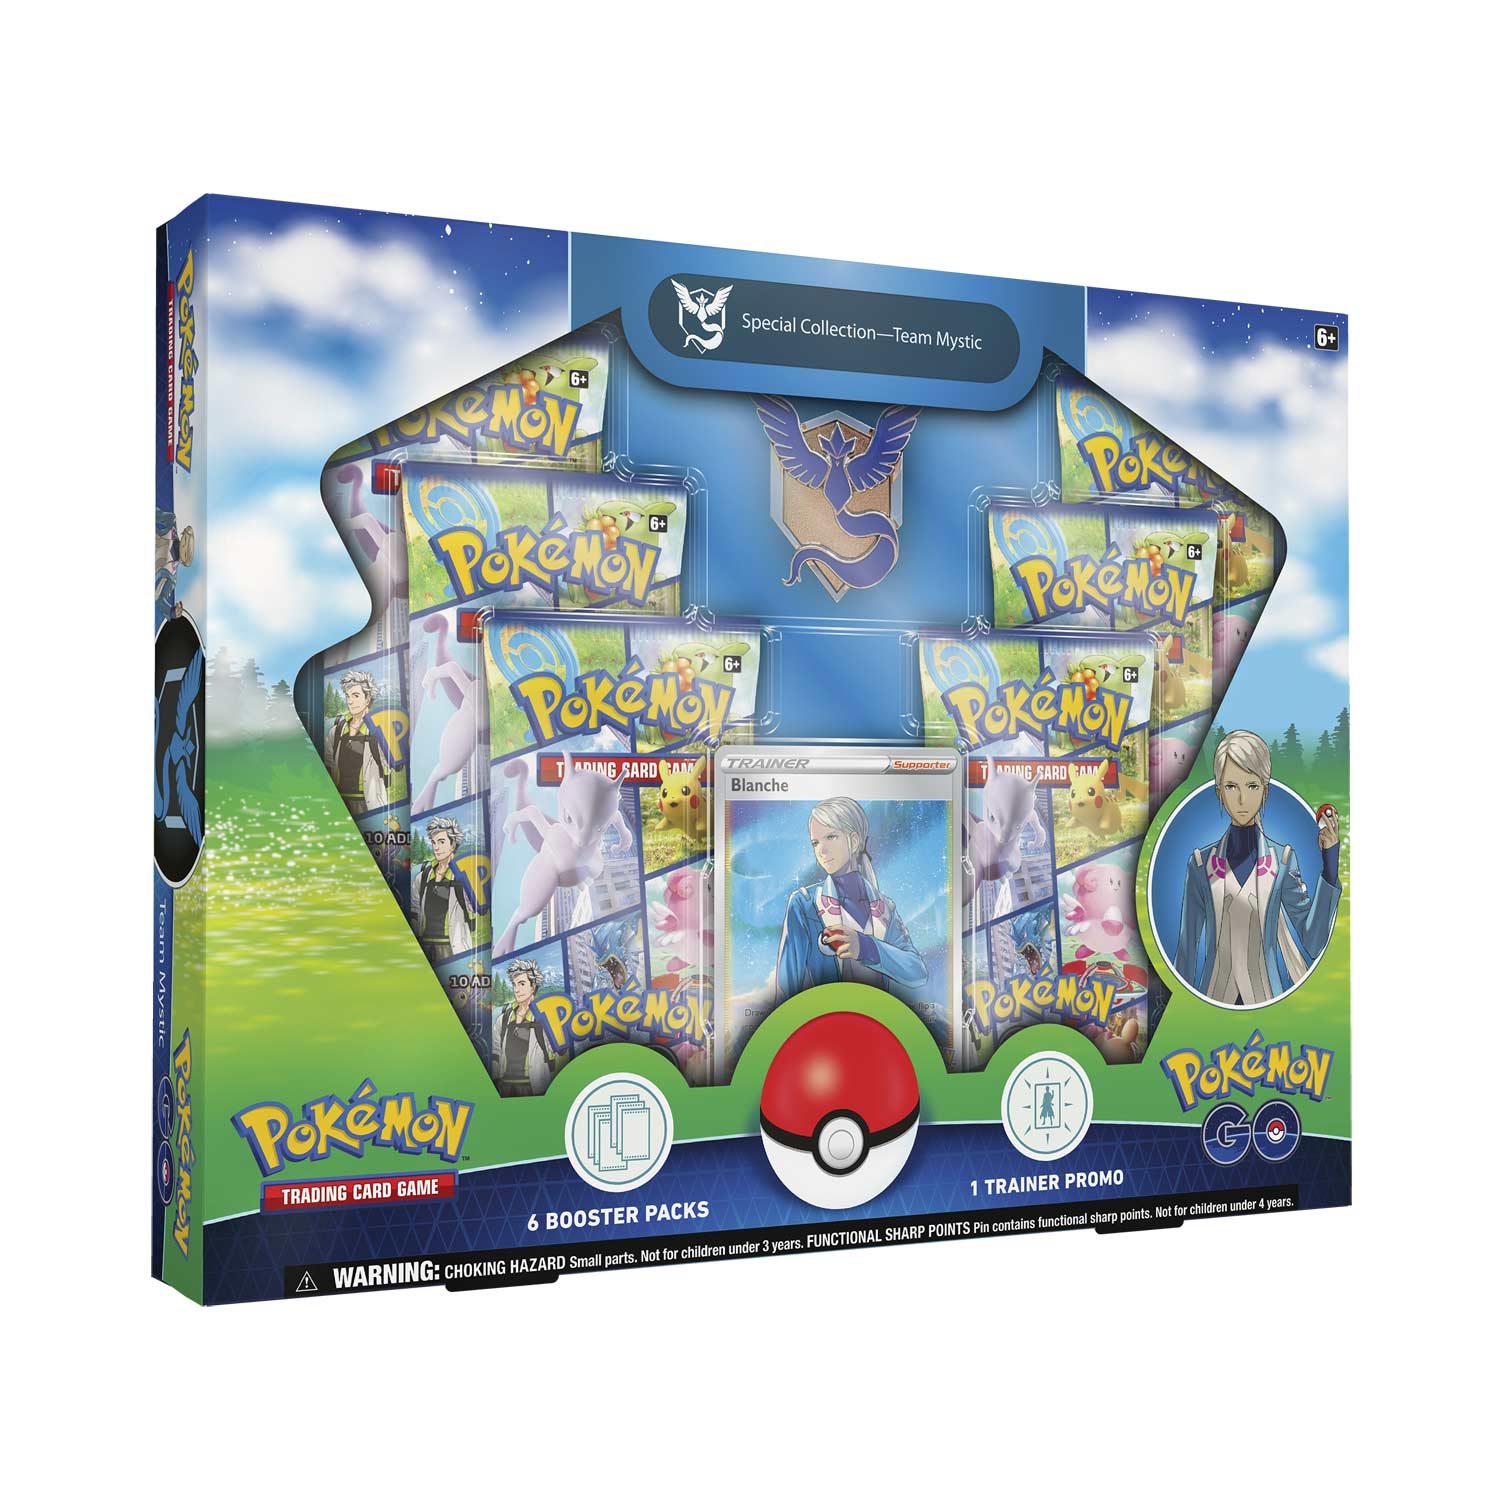 Team Mystic Special Collection is shown, featuring the Blanche full art trainer card.